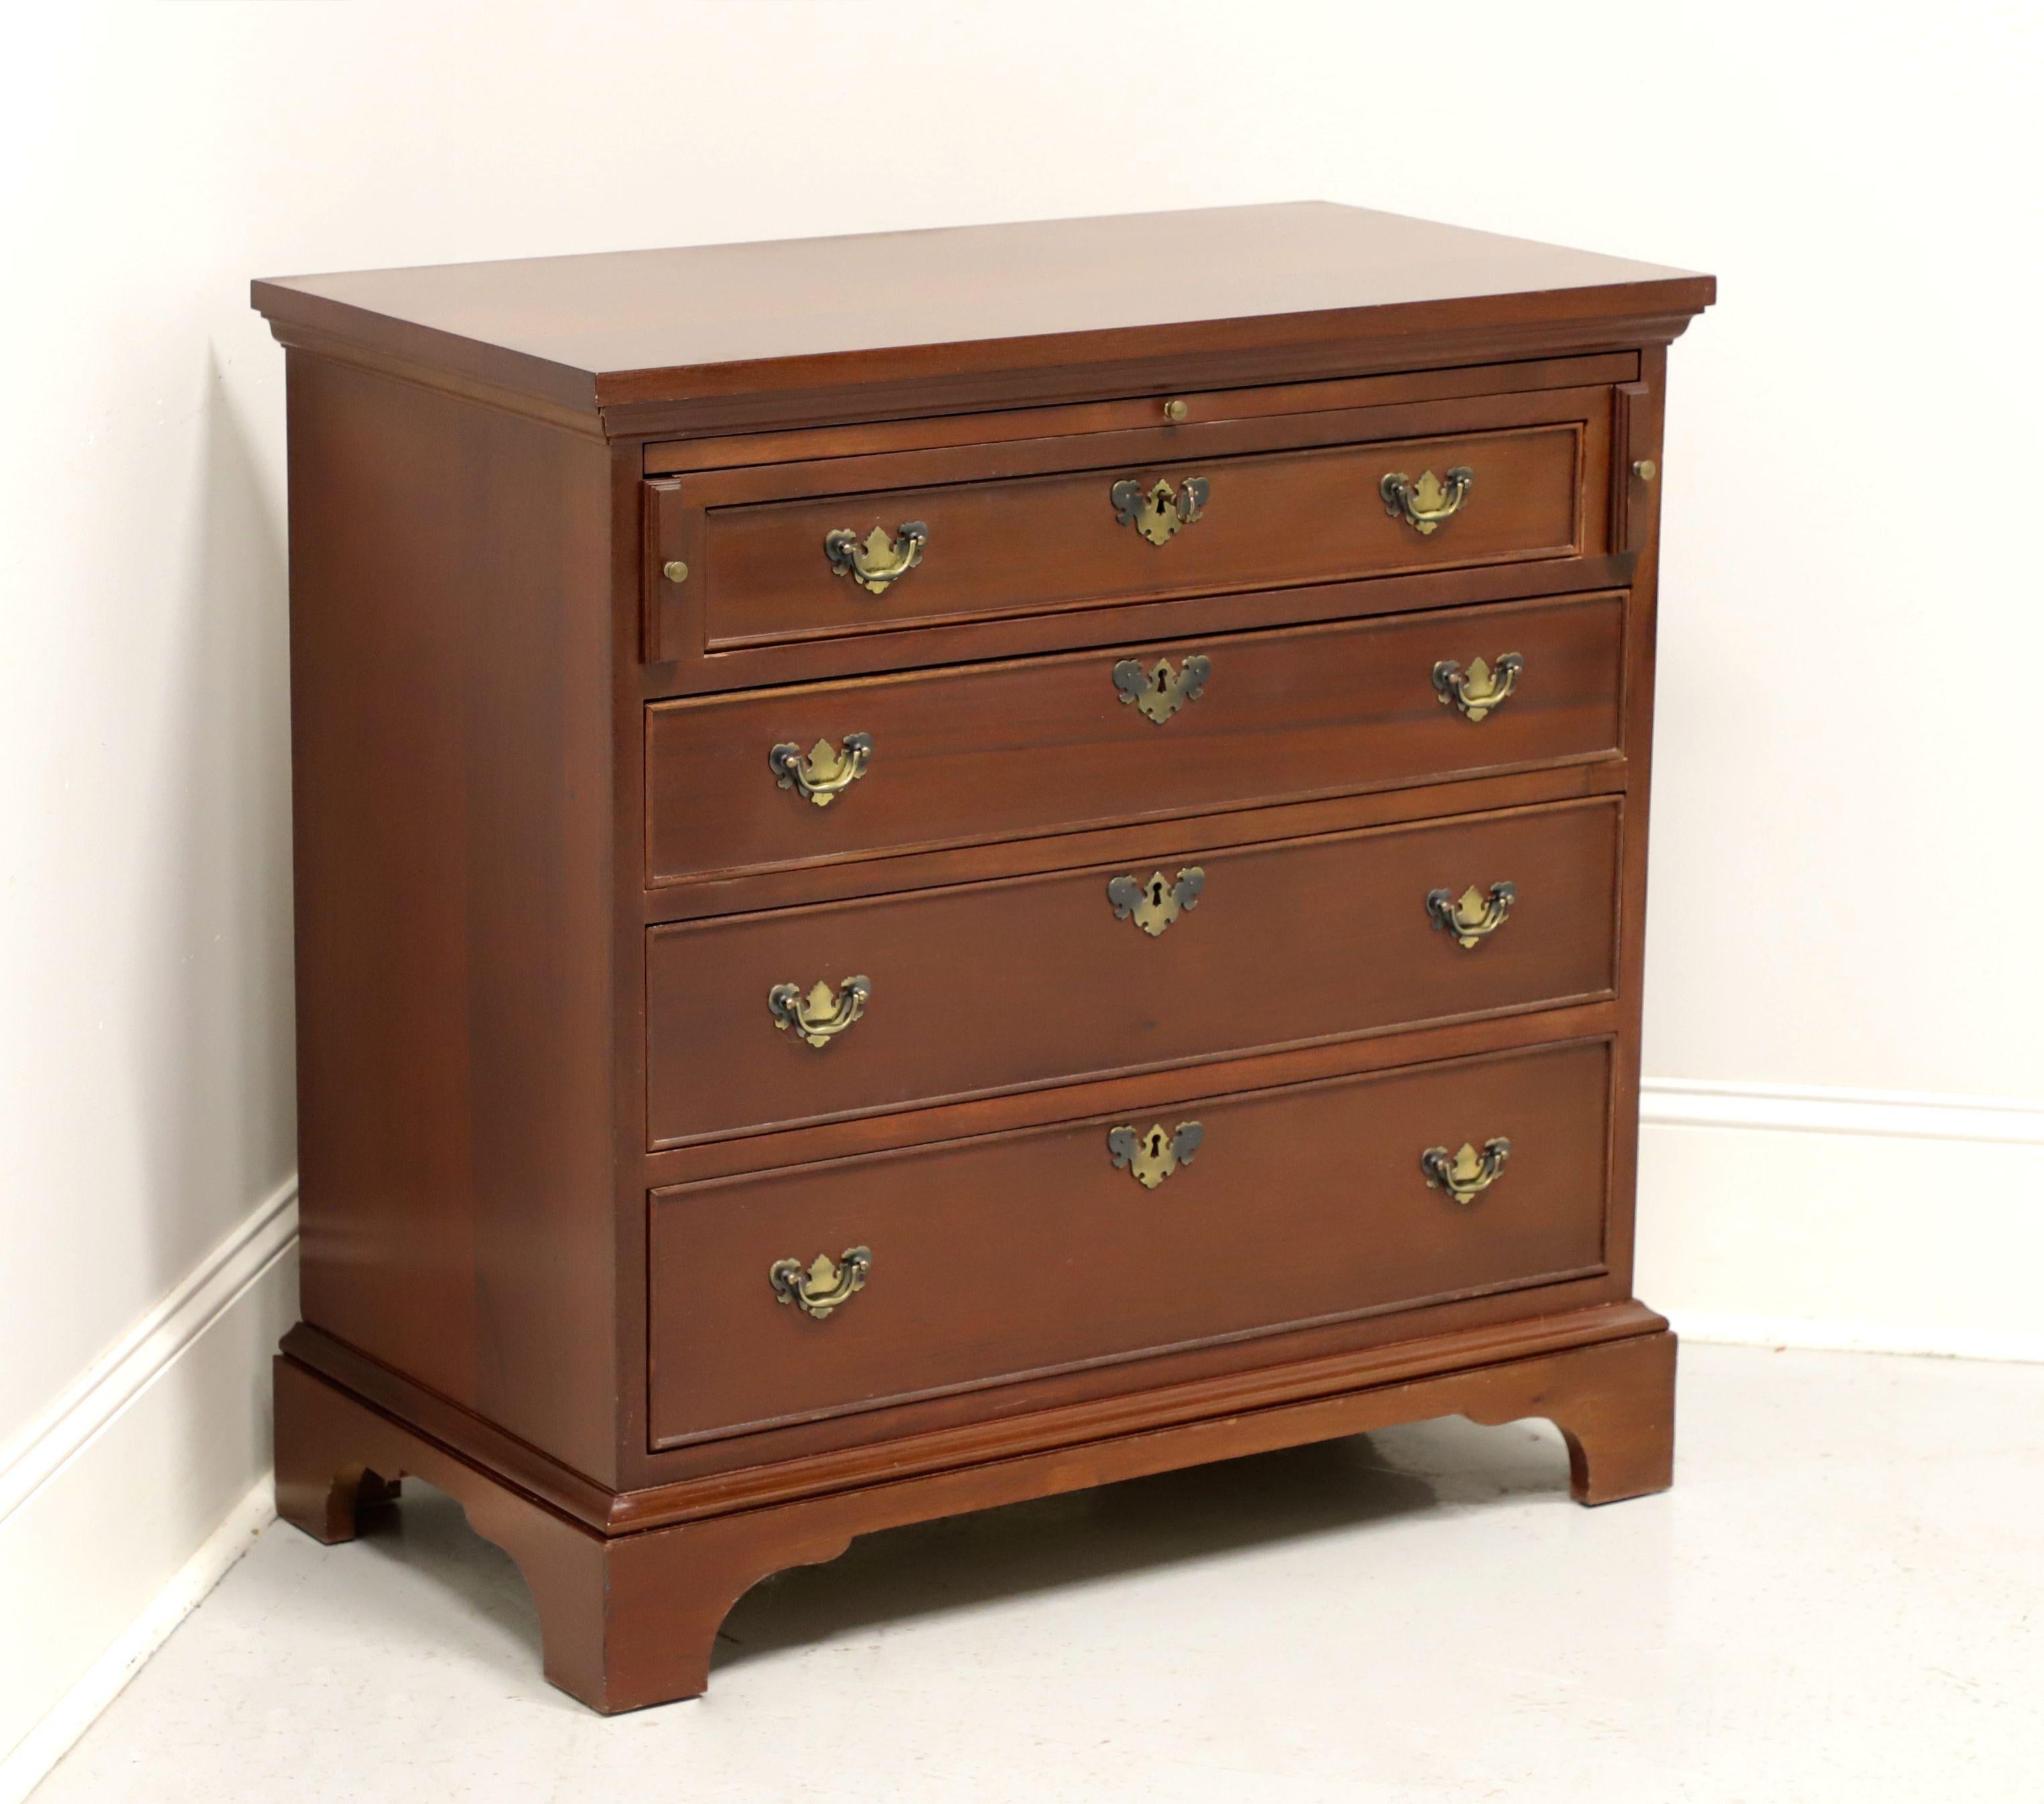 CRAFTIQUE Solid Mahogany Mary Washington Silver / Serving Chest 6